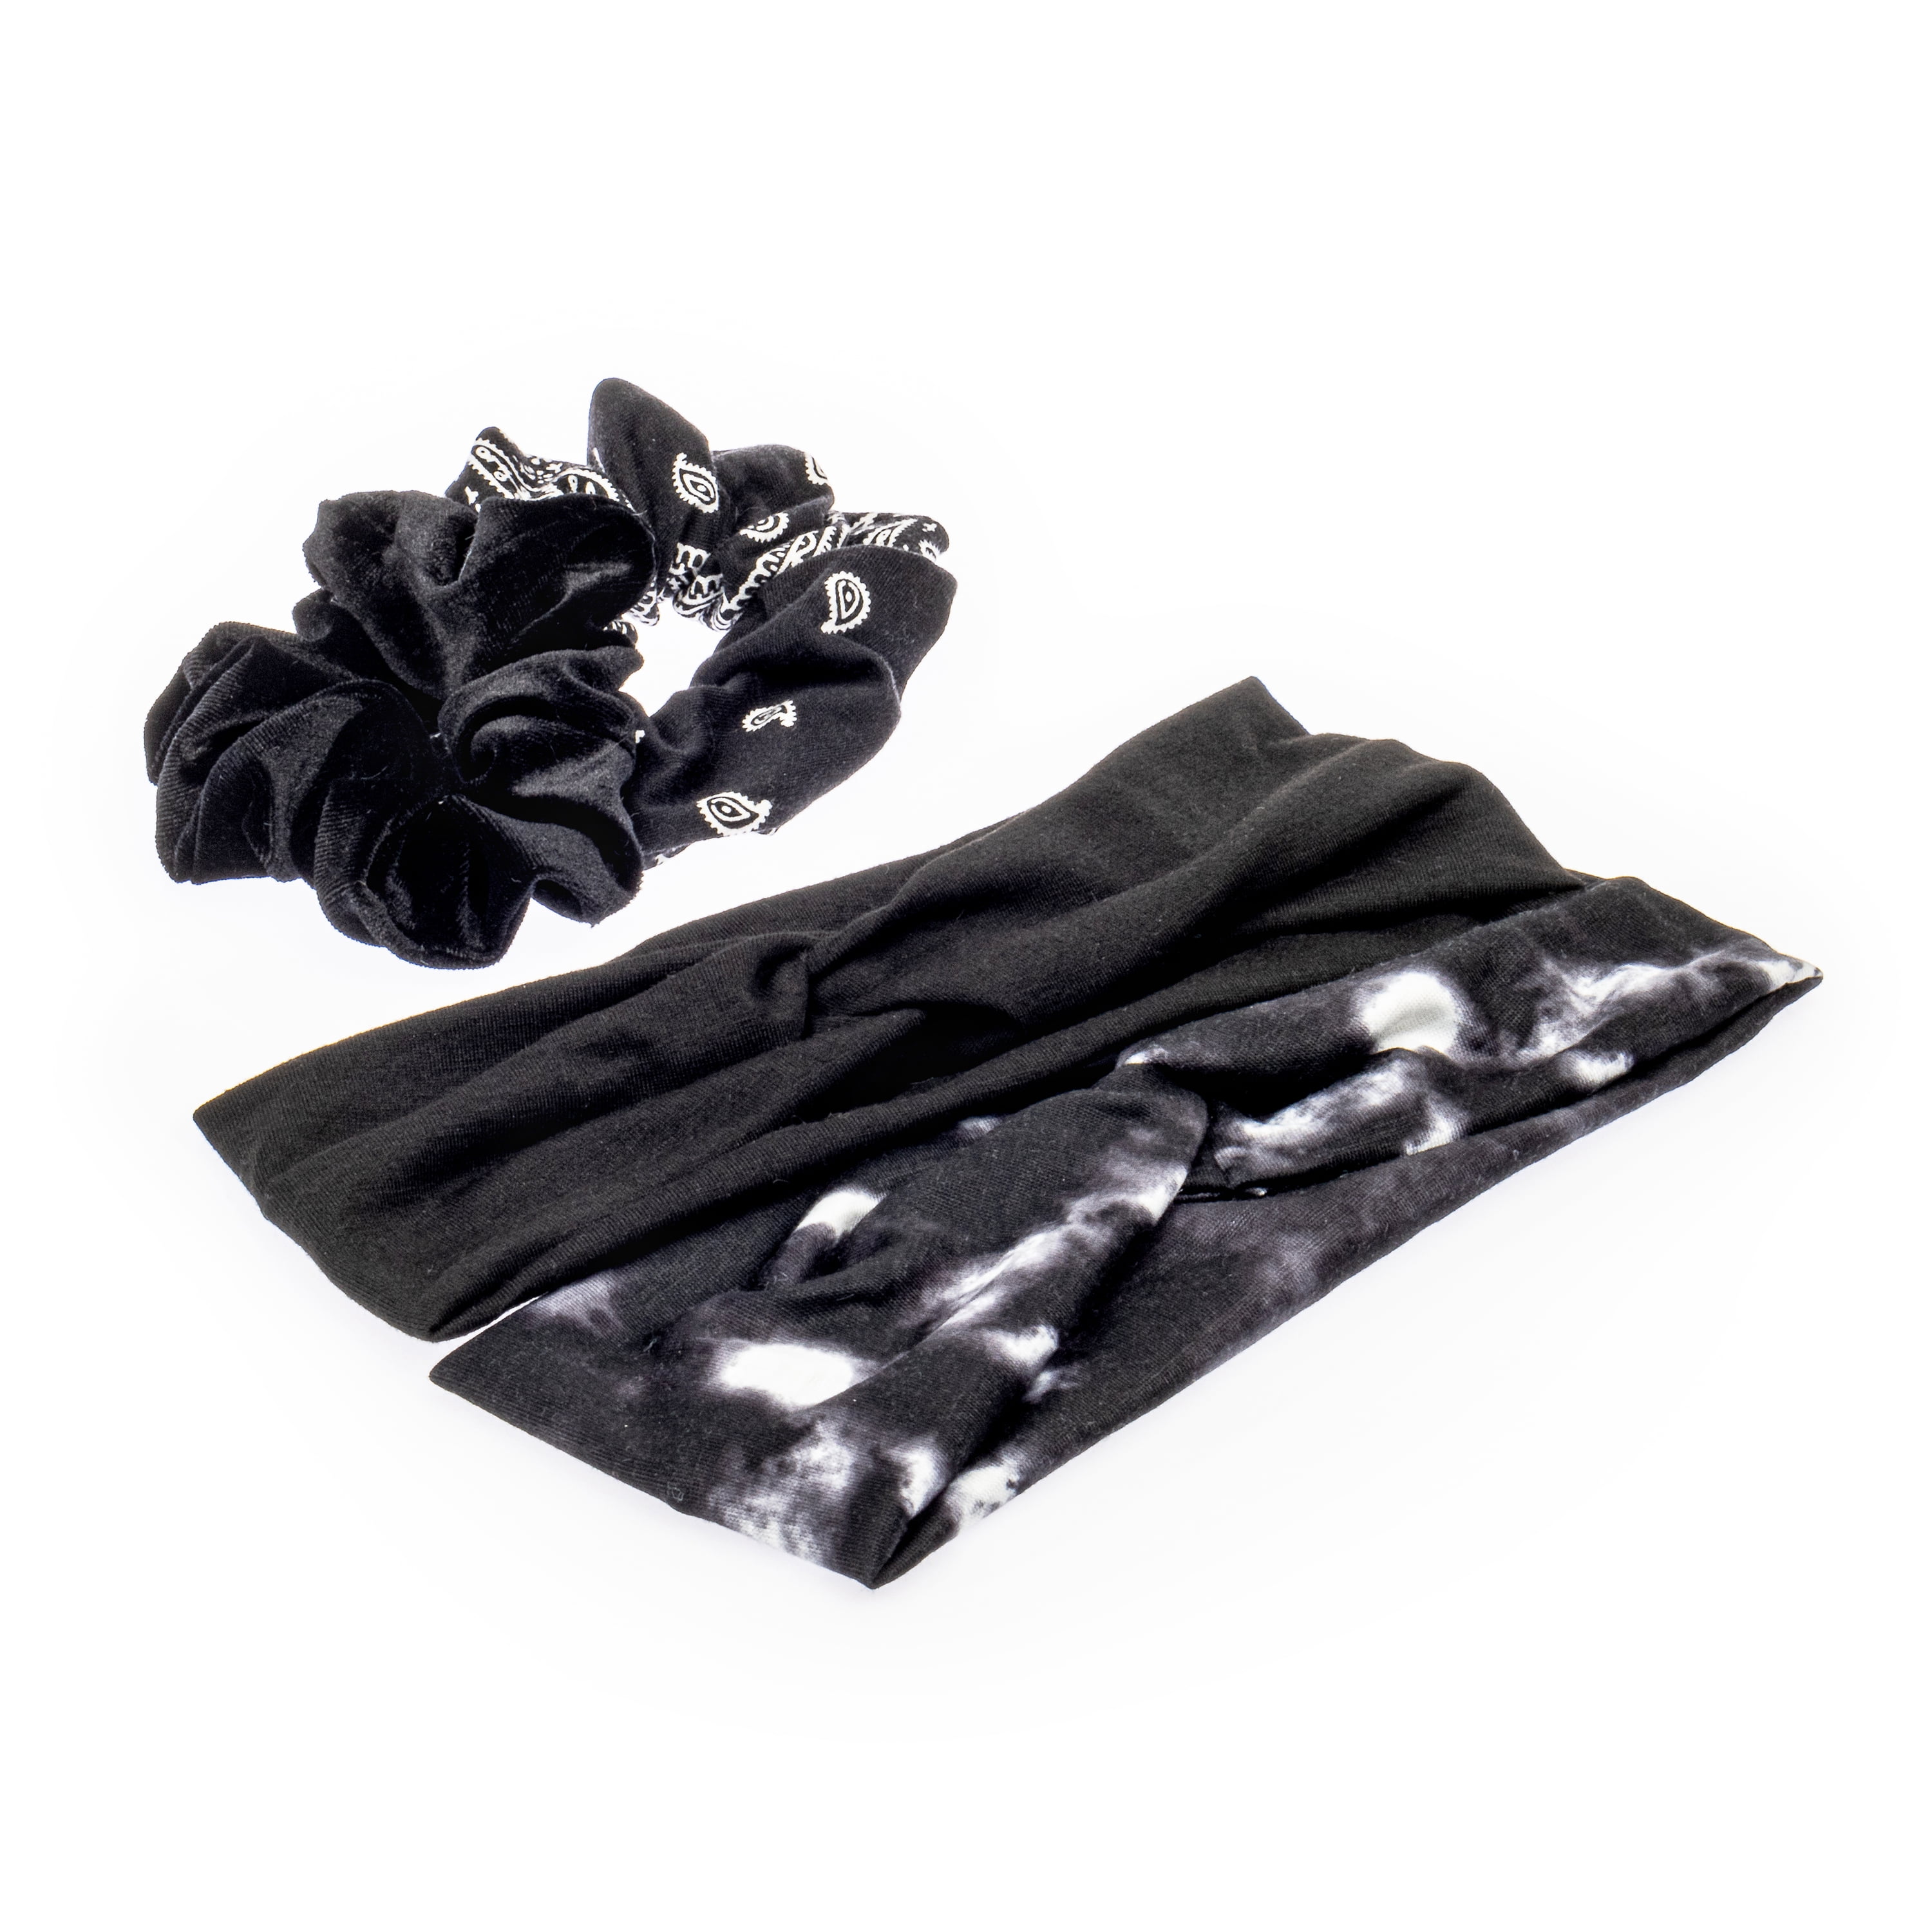 Claire's Knotted Headbands for Girls Age 8+, Tweens & Teens Size 5.5 W x  6.2 H | Cute & Comfortable Fashion Hairband Kids Hair Accessories (Black